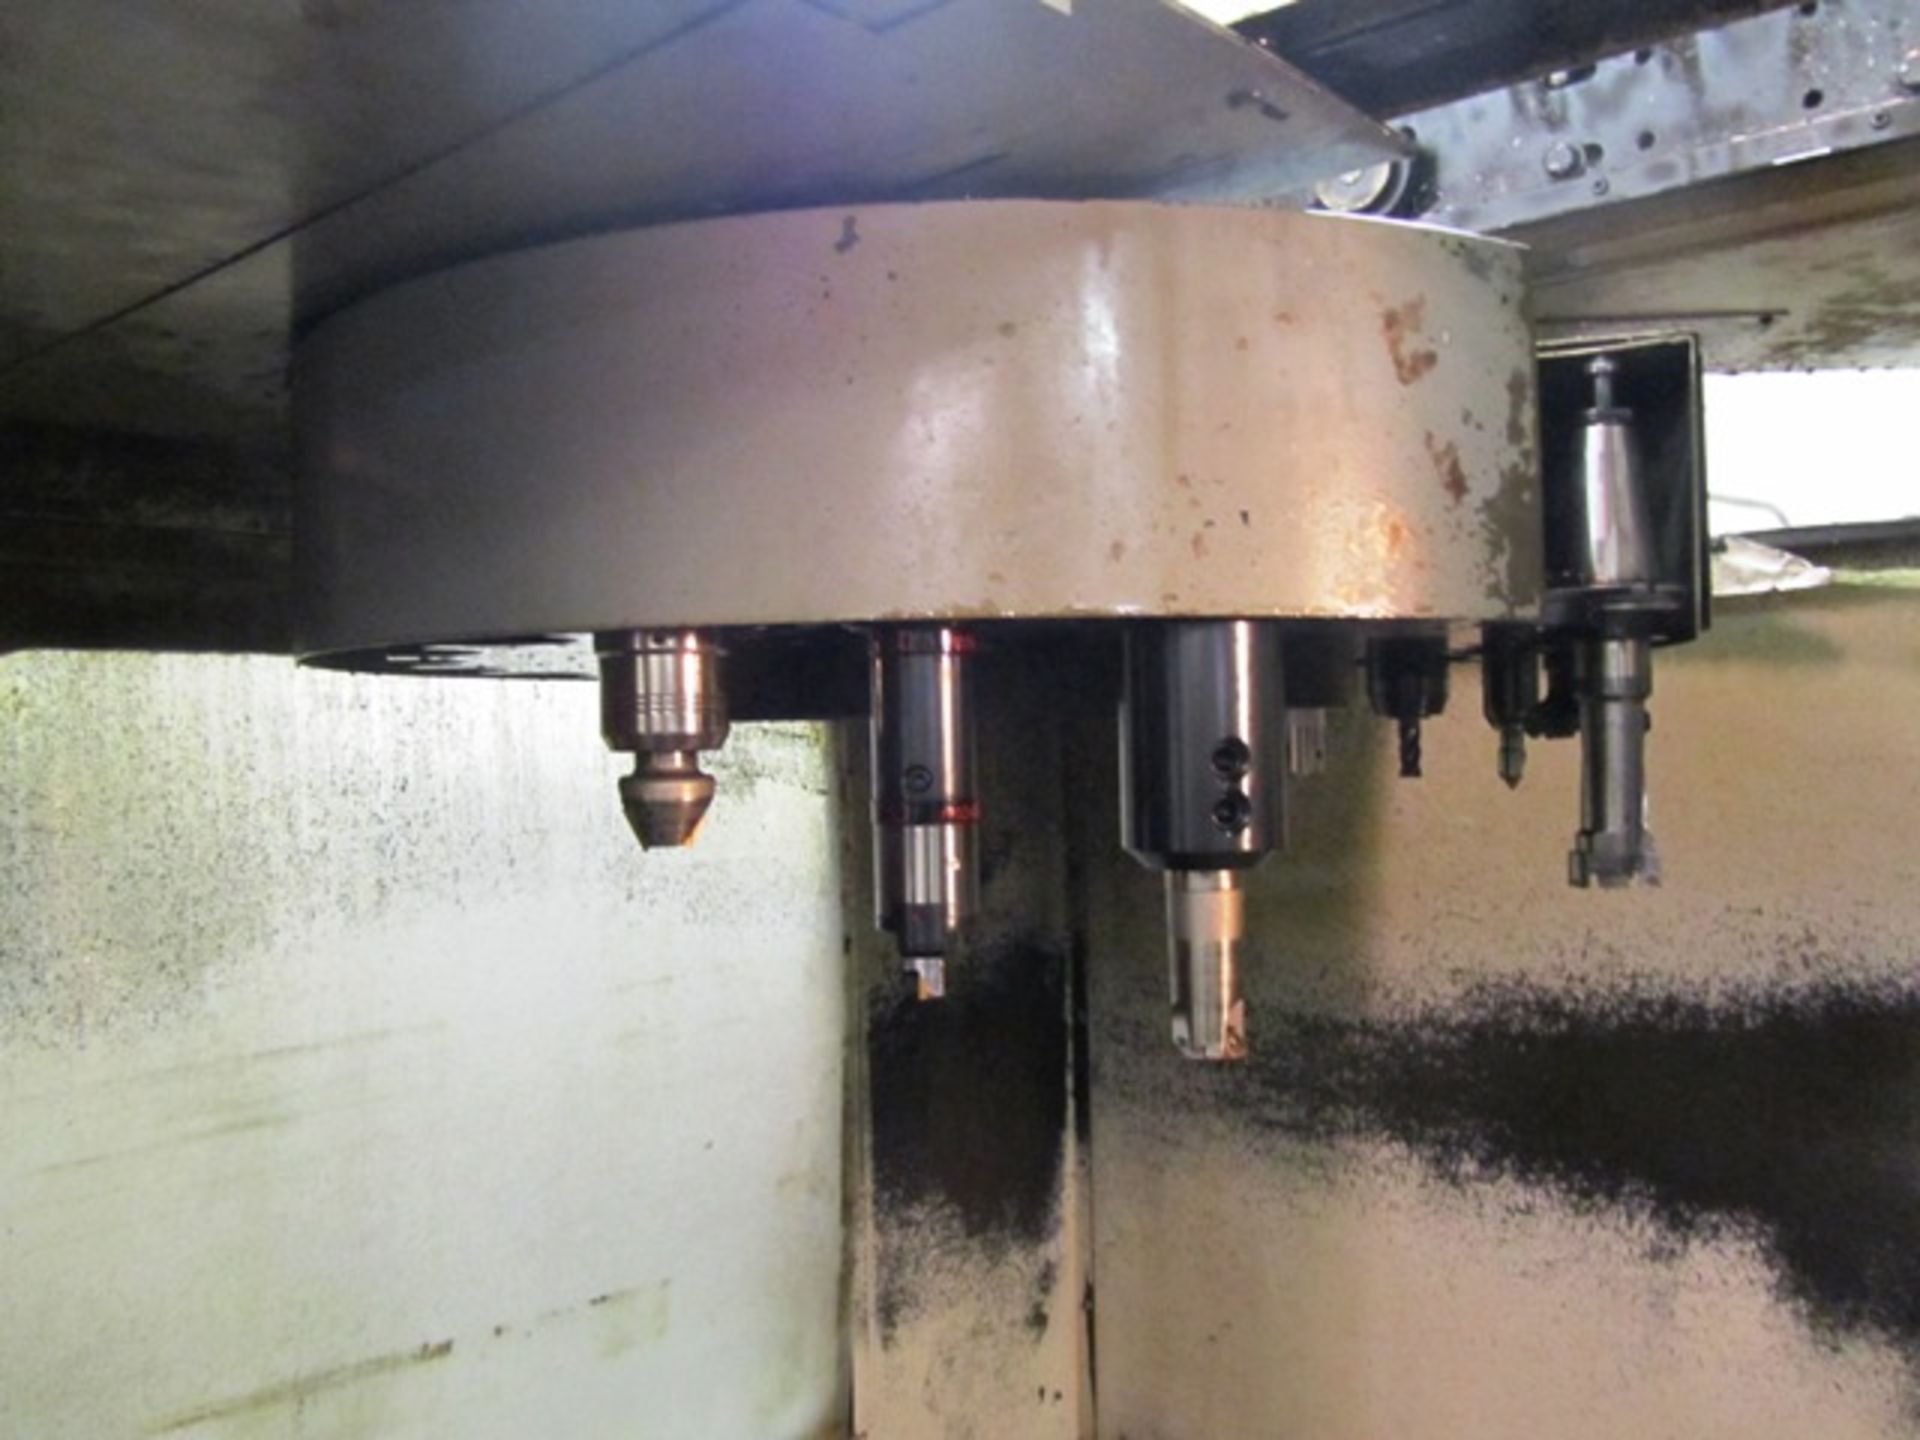 Haas VF8 CNC Vertical Machining Center with 36'' x 64'' Table, #50 Taper Spindle Speeds to 5000 RPM, - Image 3 of 6